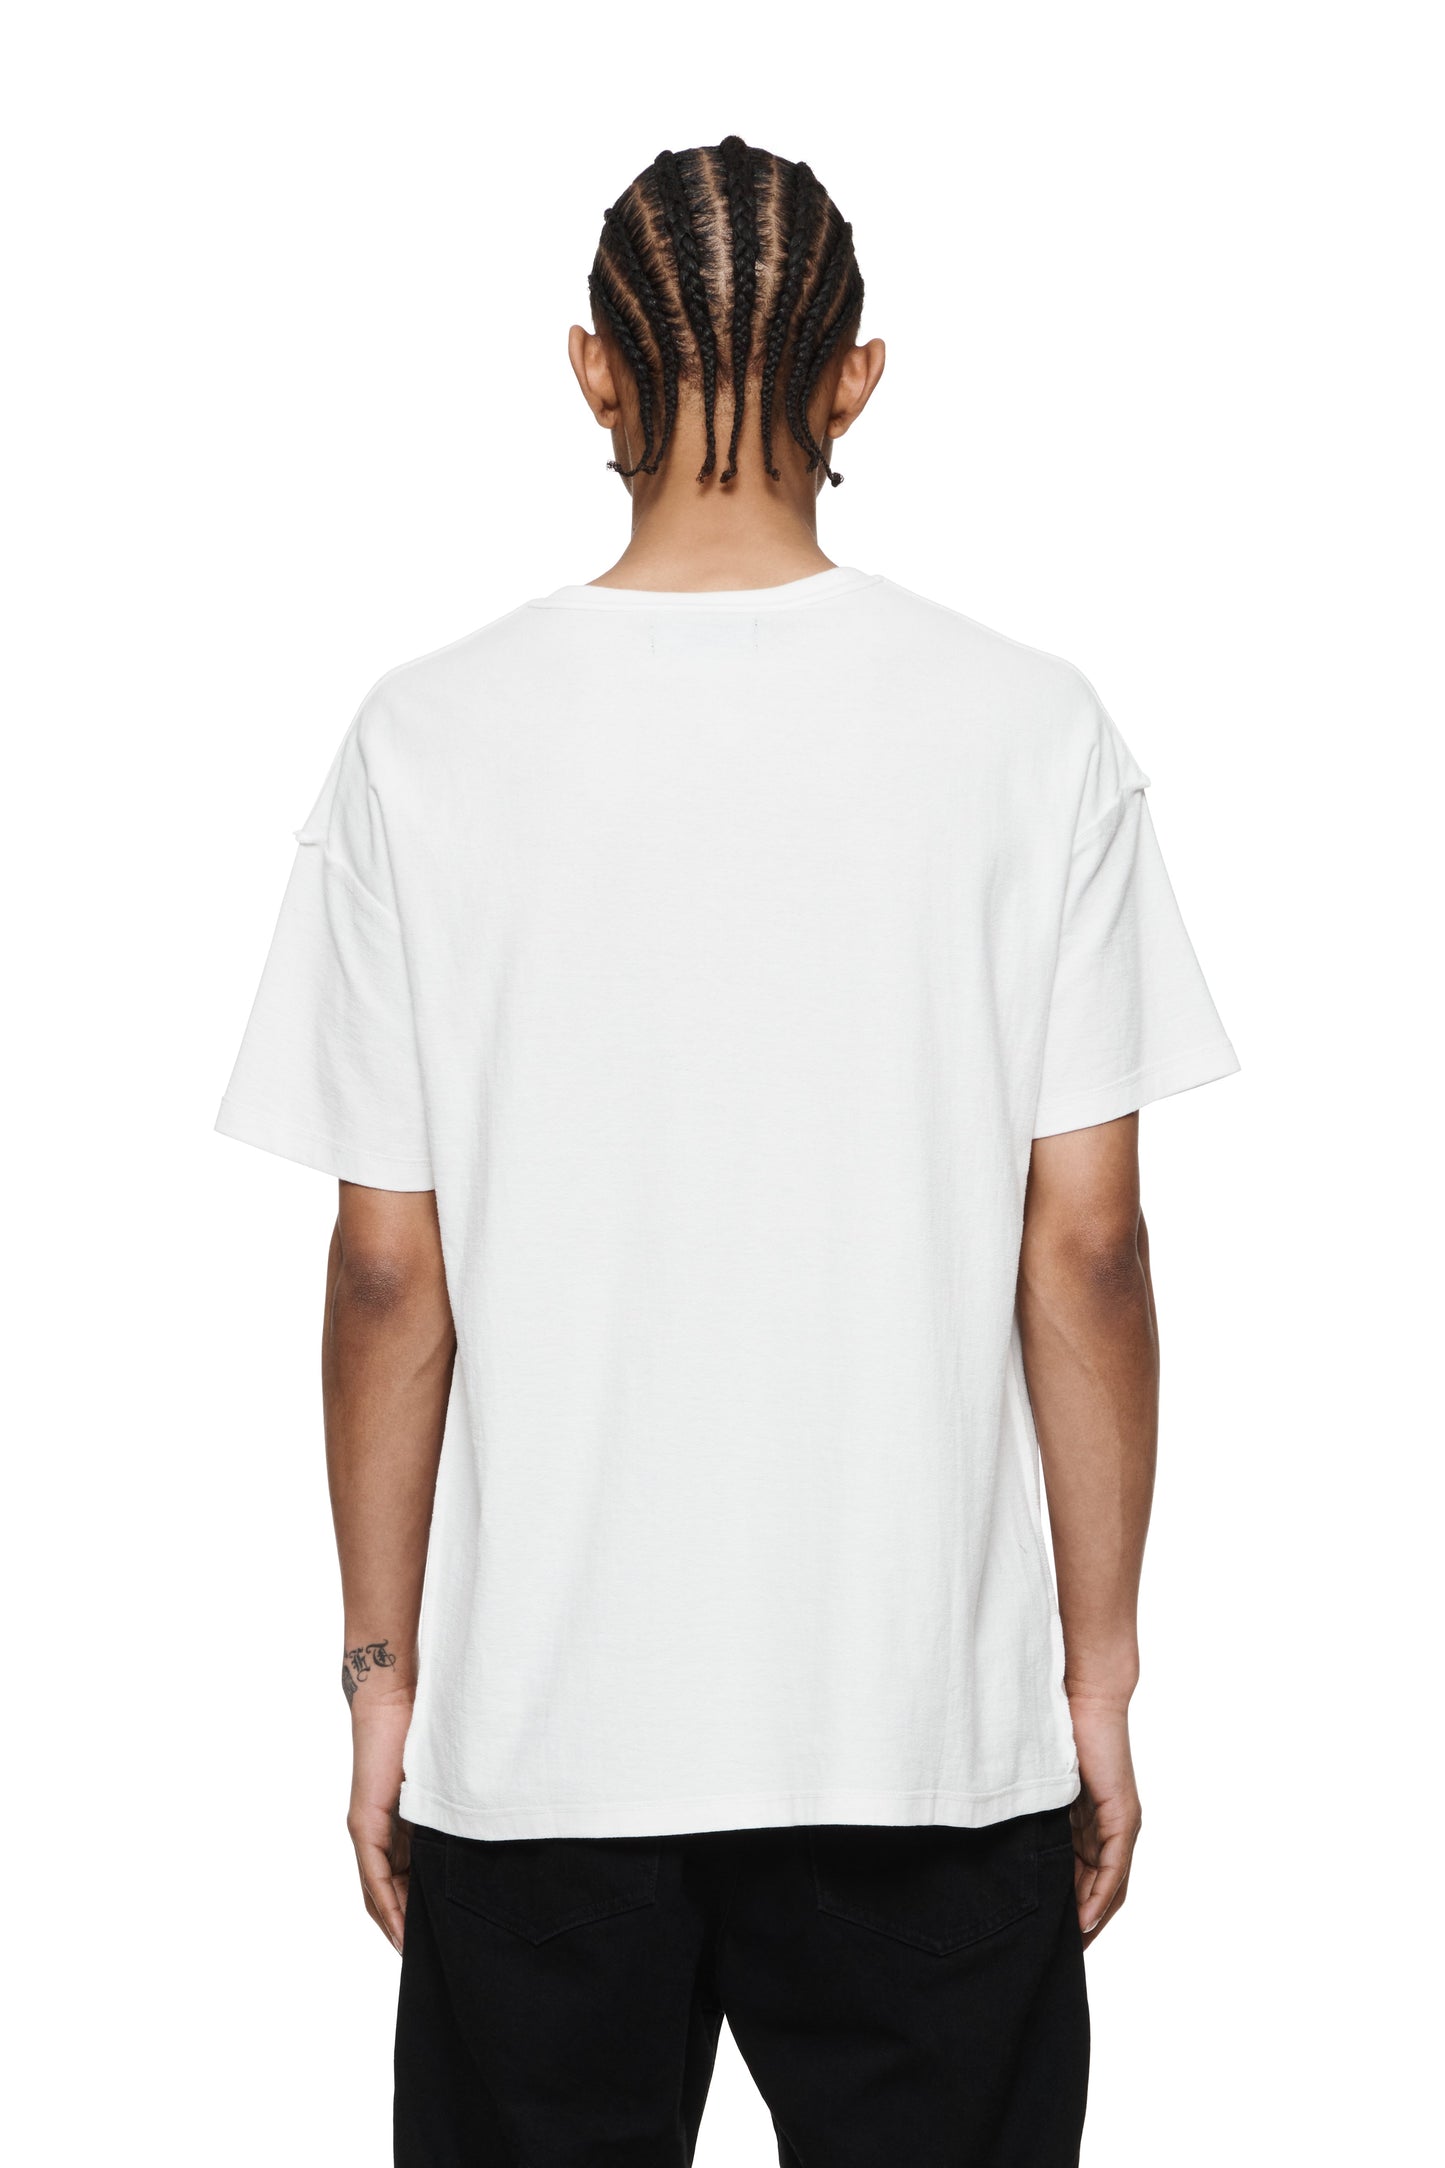 EXIT T-SHIRT - Off White